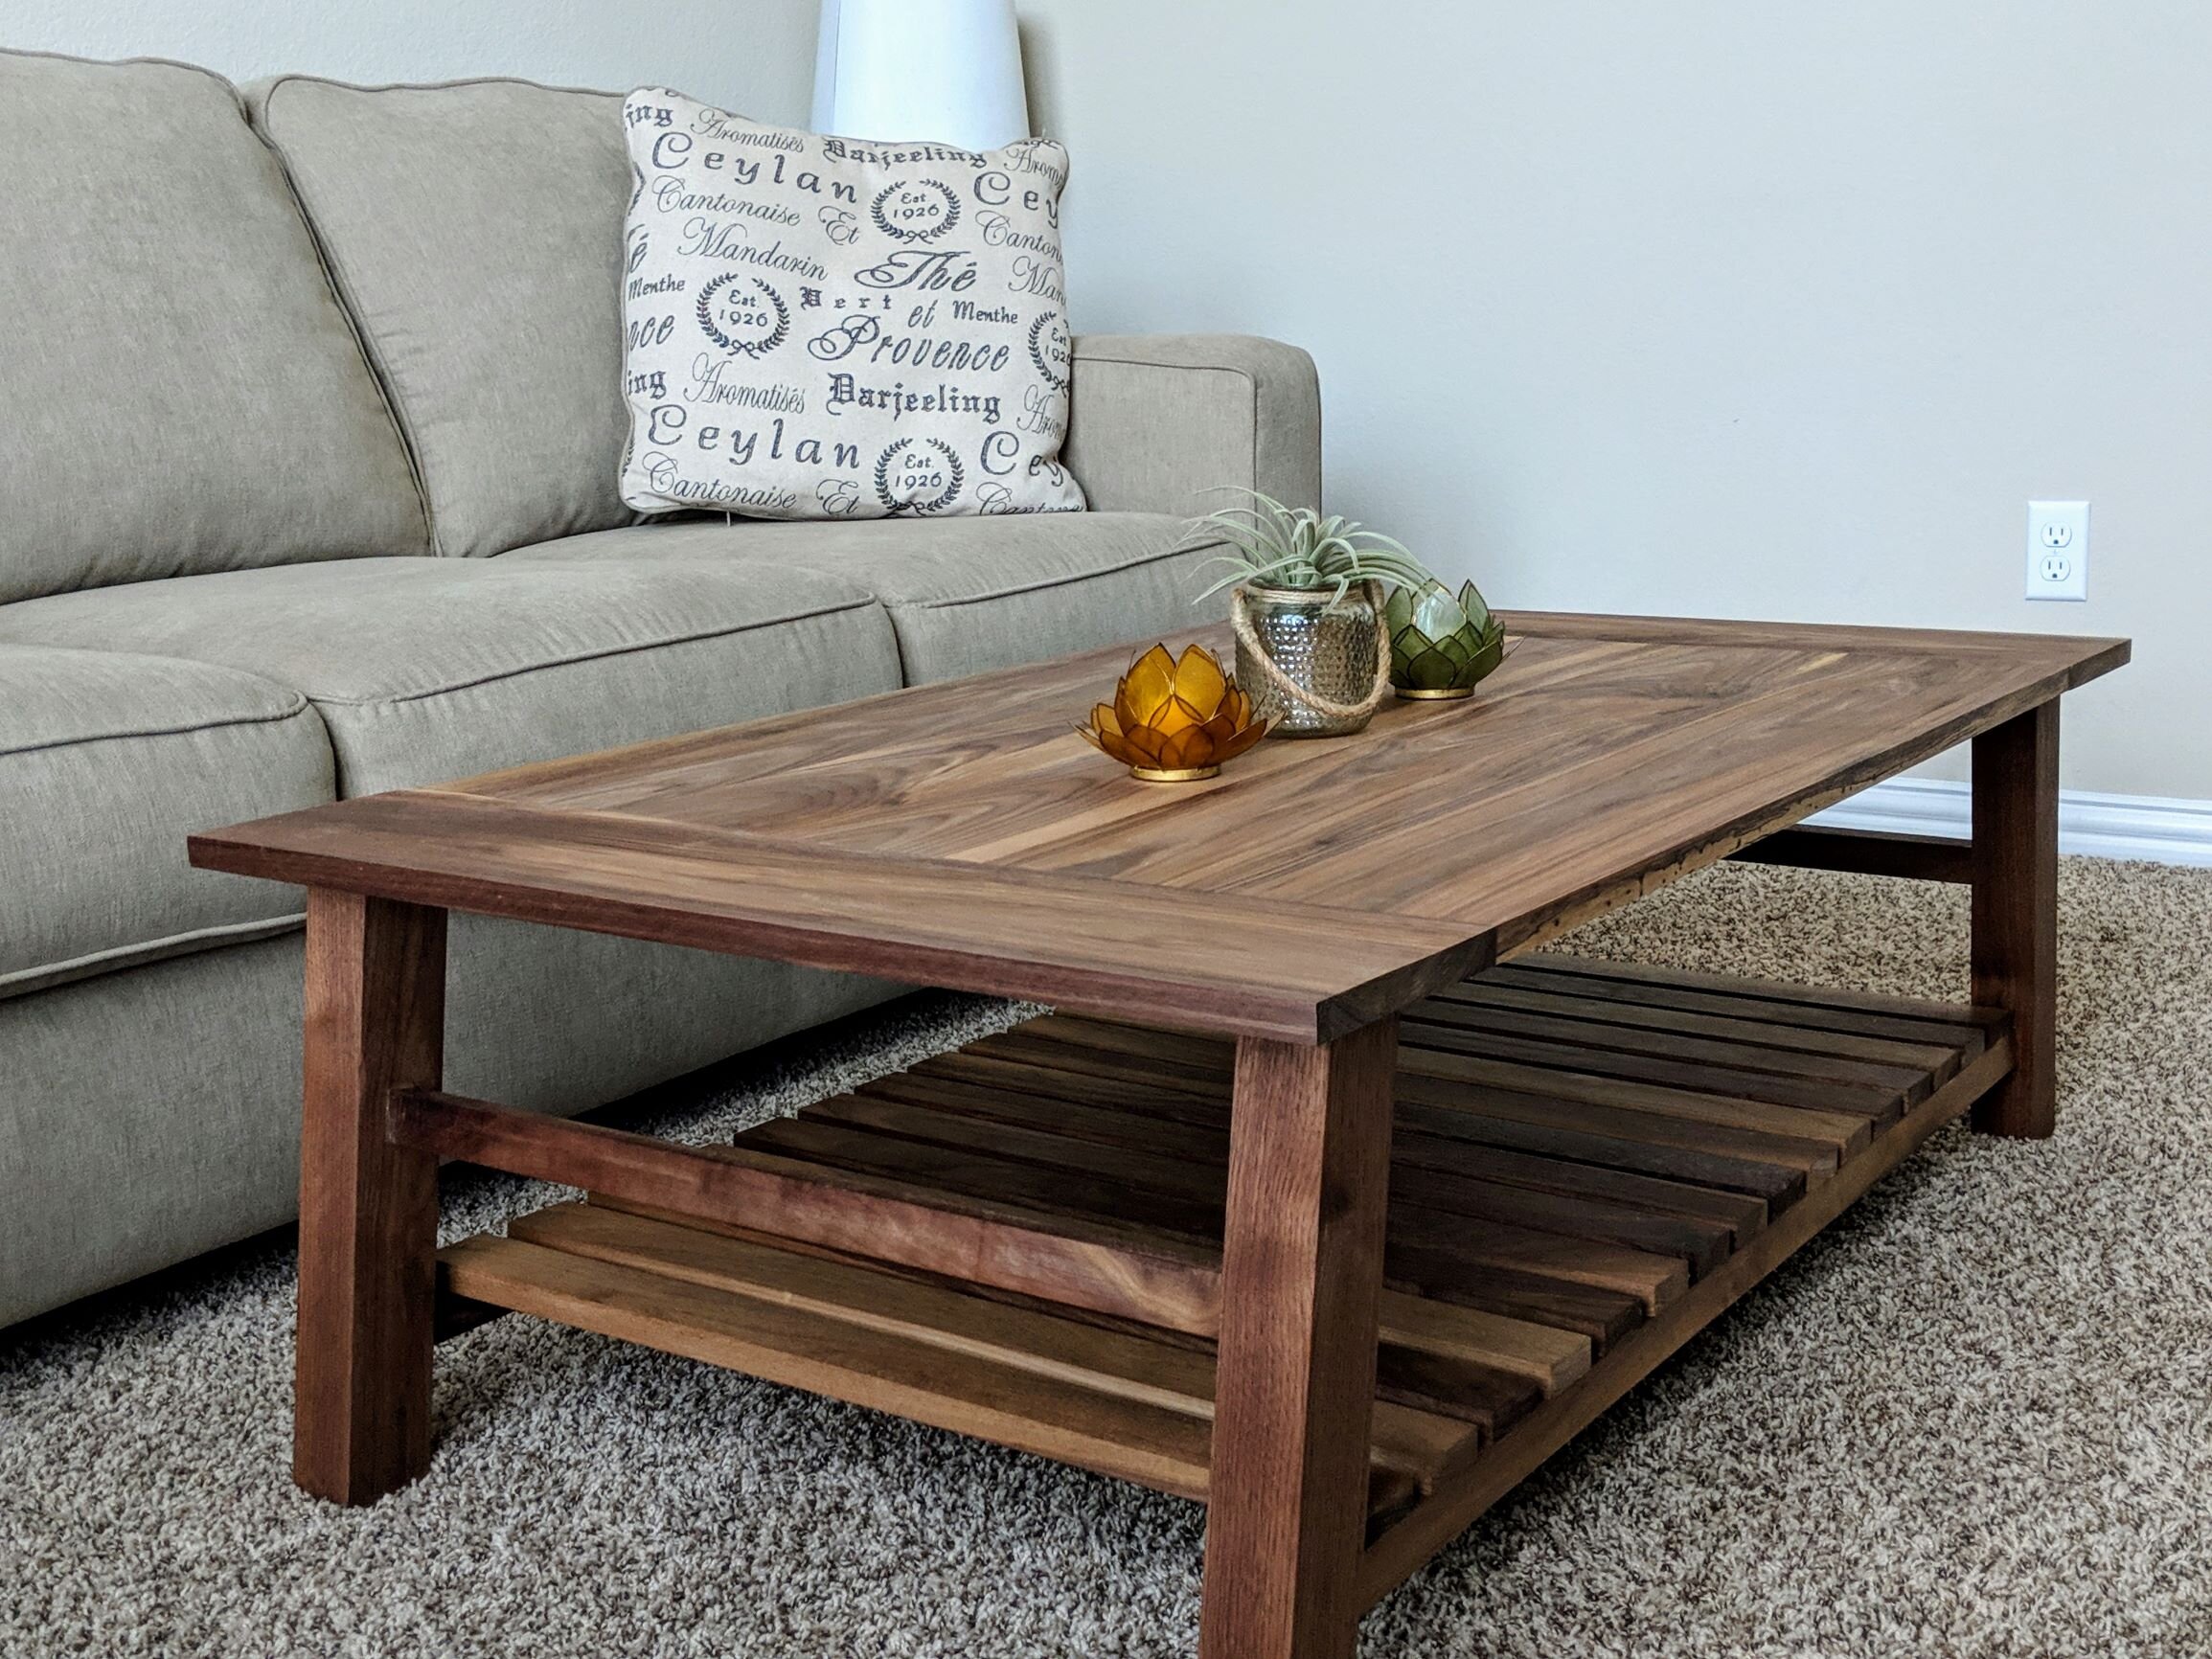 The Colton Coffee Table